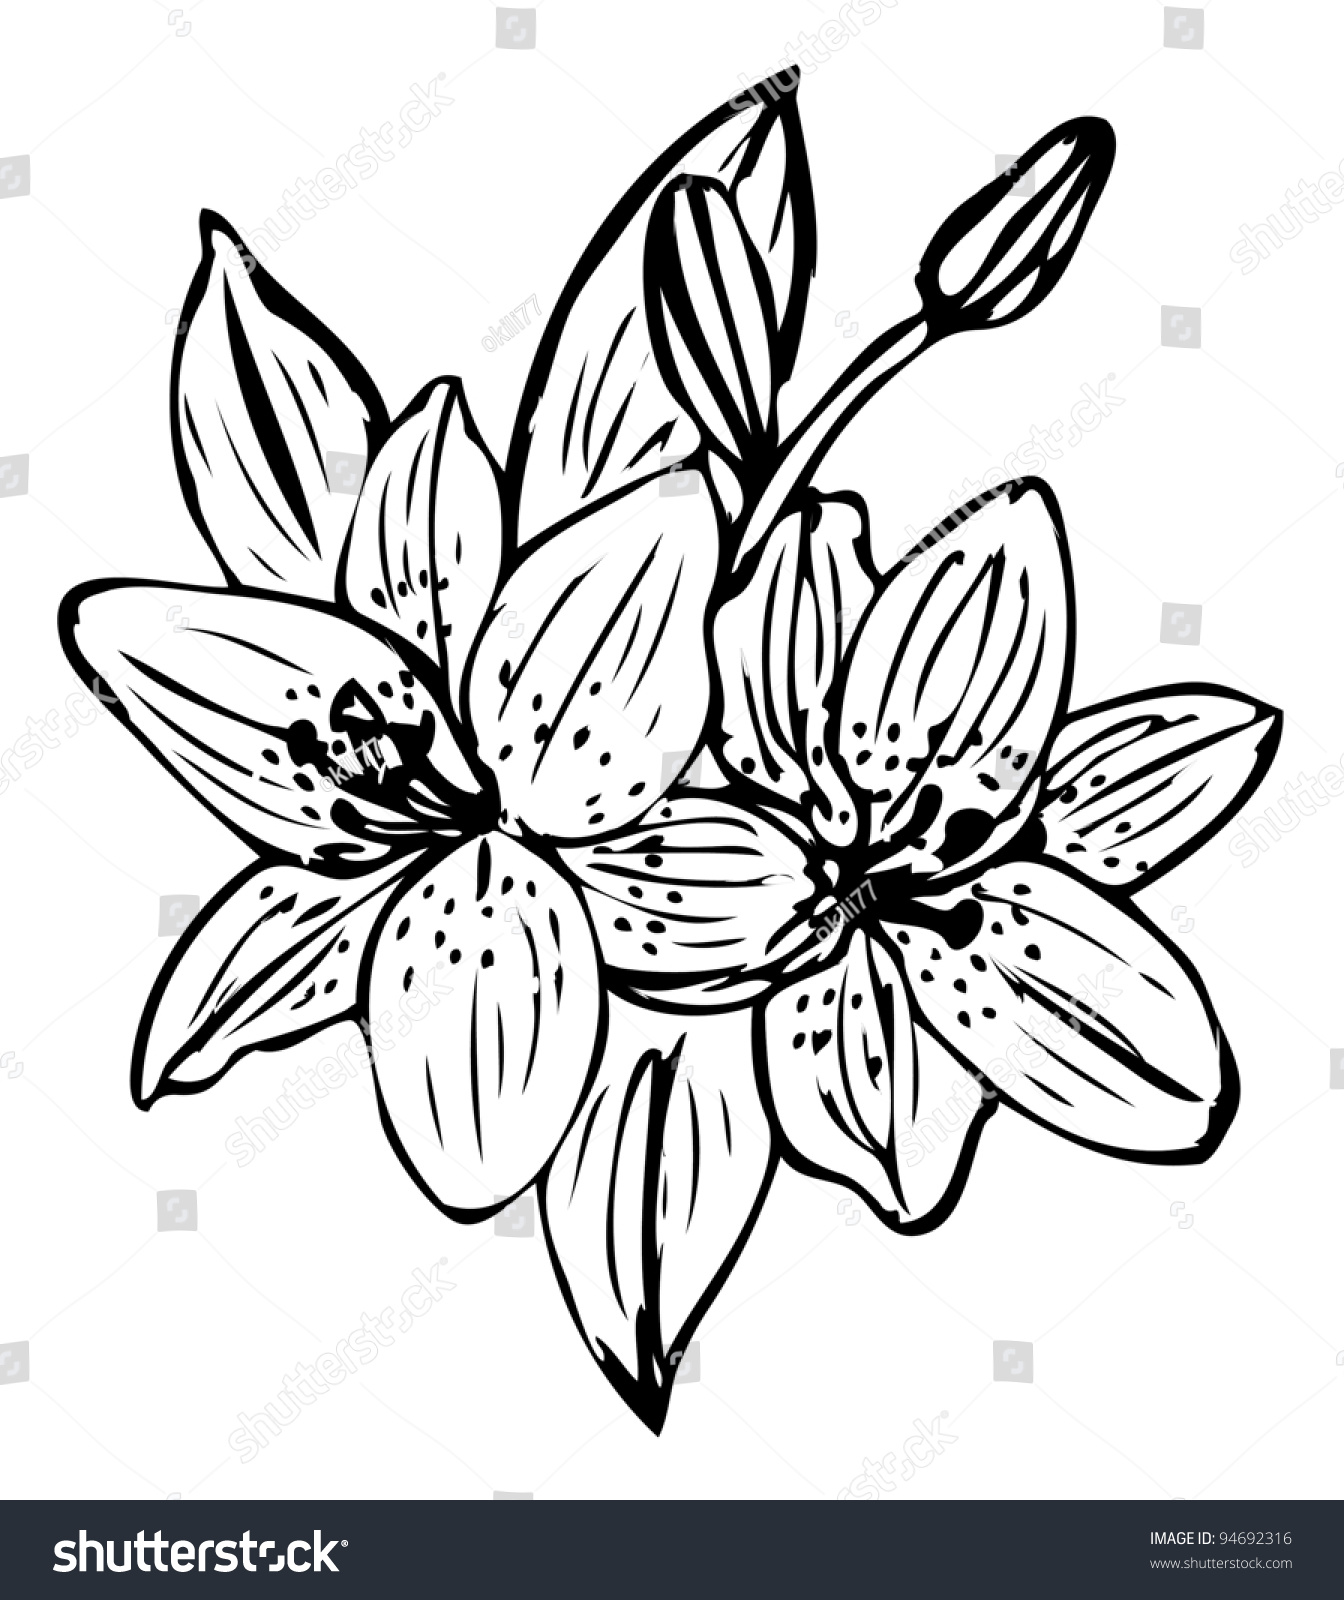 Download Lily Flower Outline Vector Isolated On Stock Vector 94692316 - Shutterstock